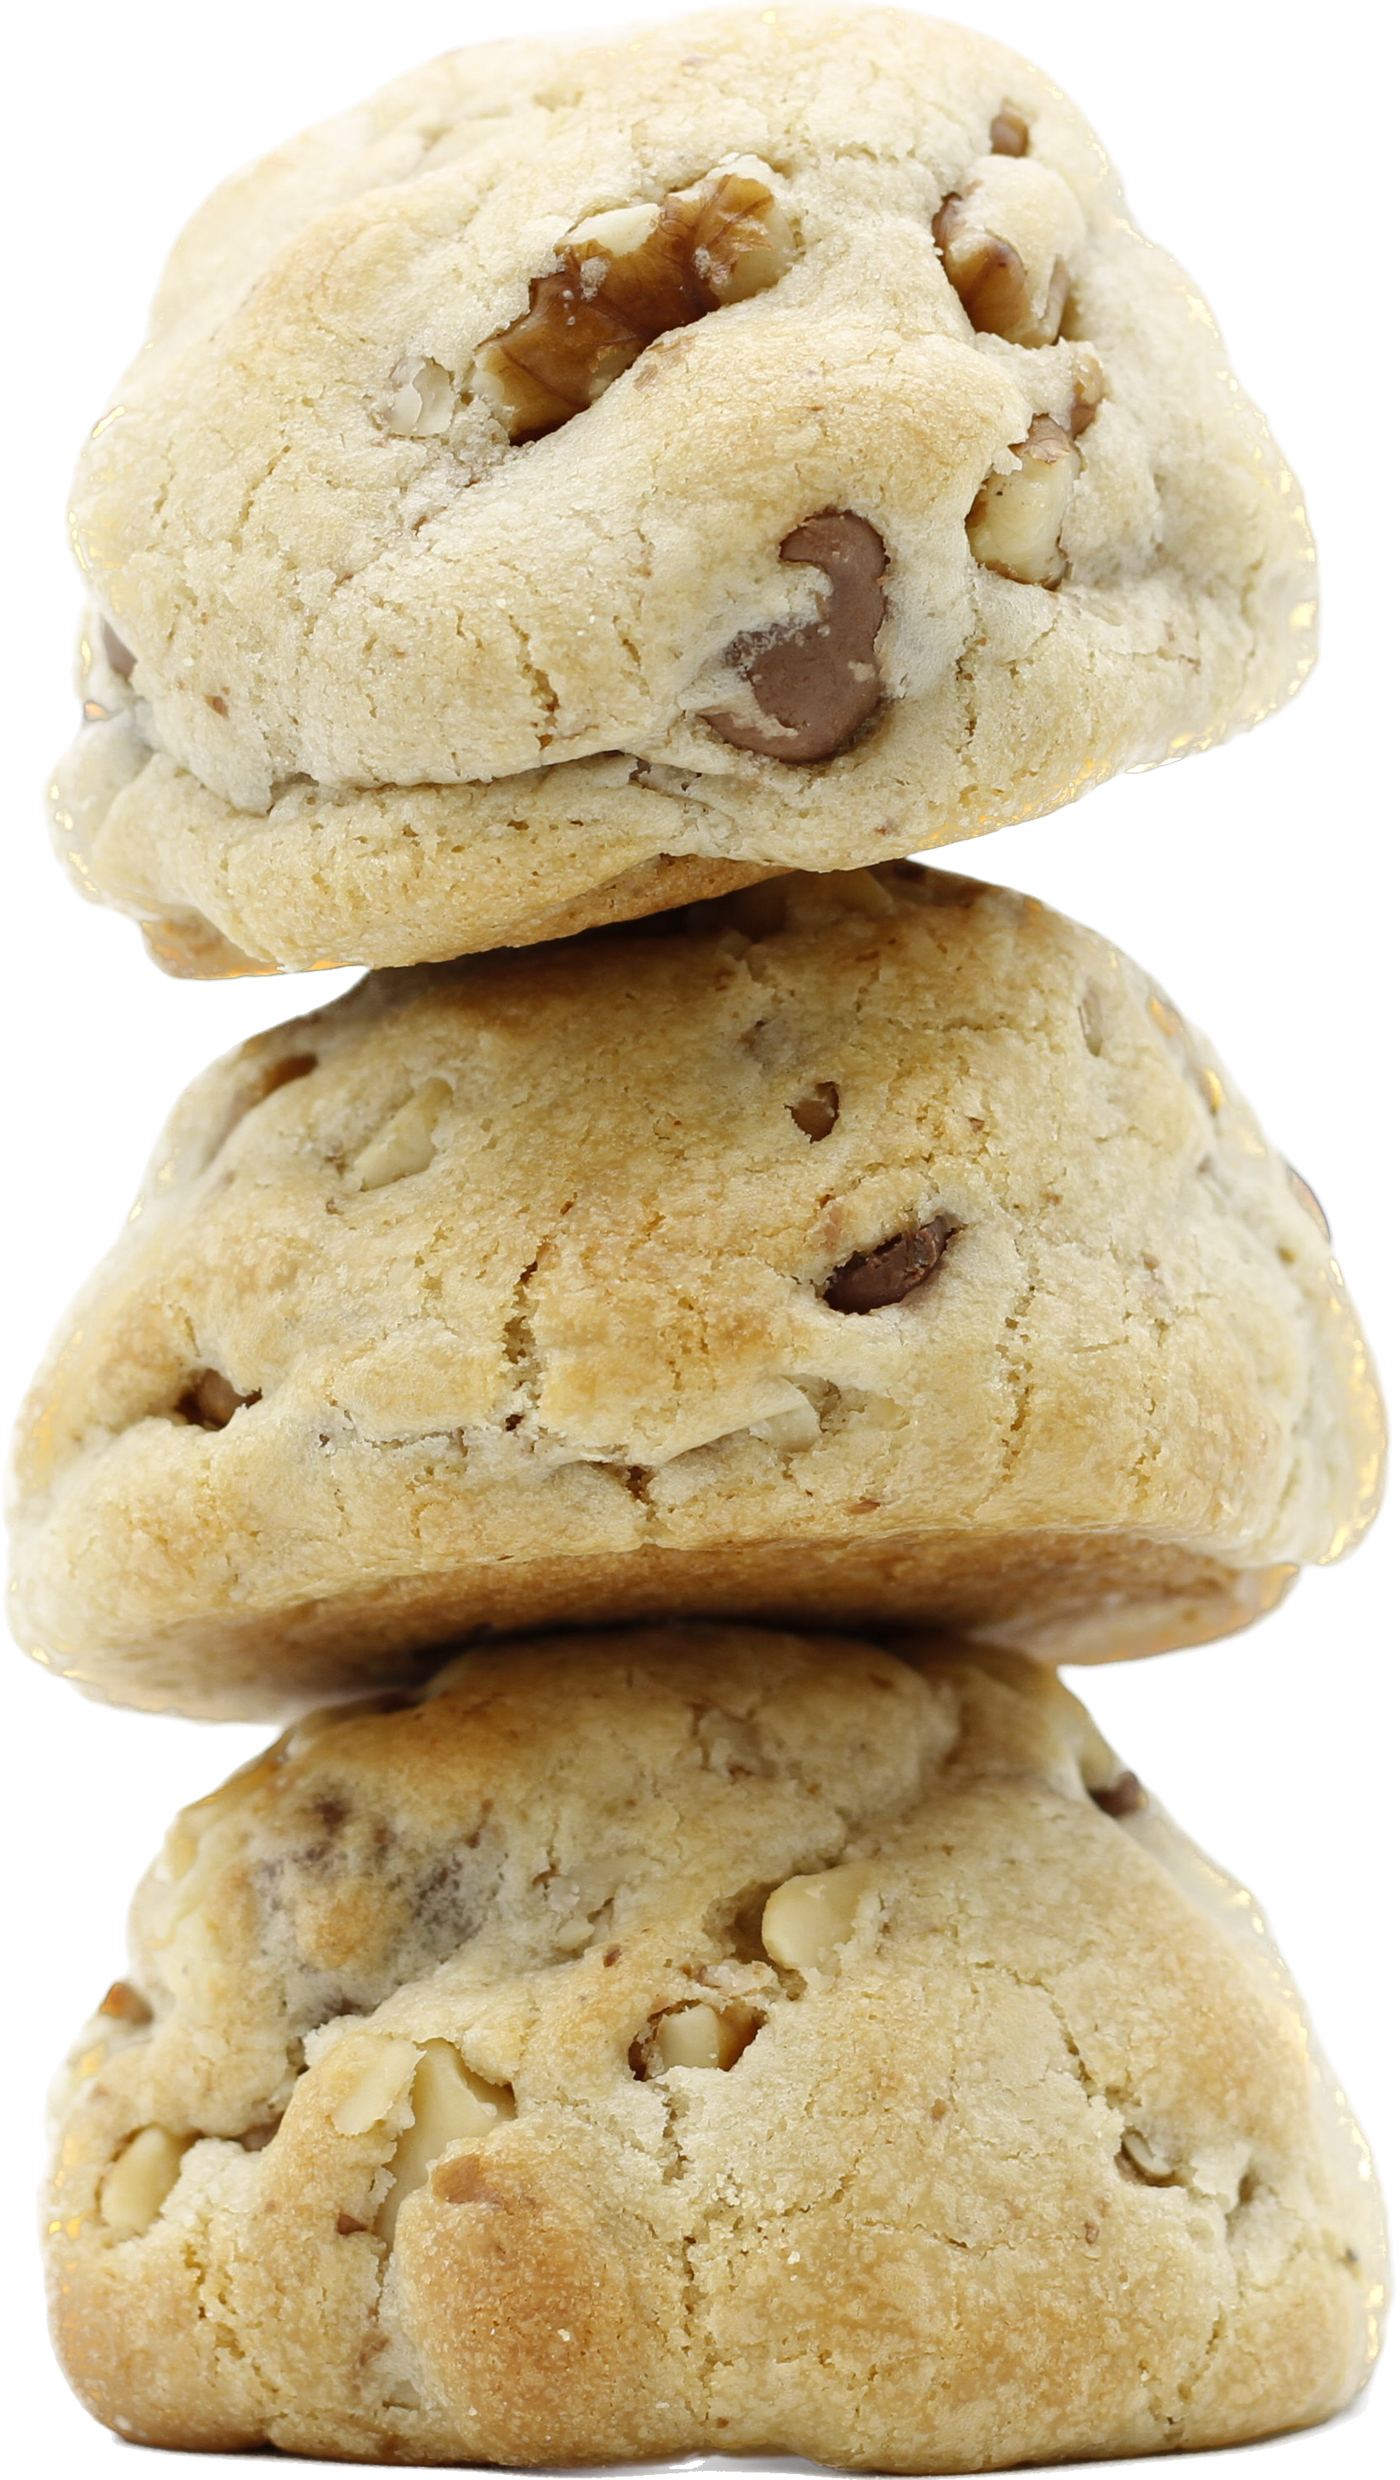 A stack of three delicious chocolate chip walnut cookies, perfect for satisfying your sweet tooth